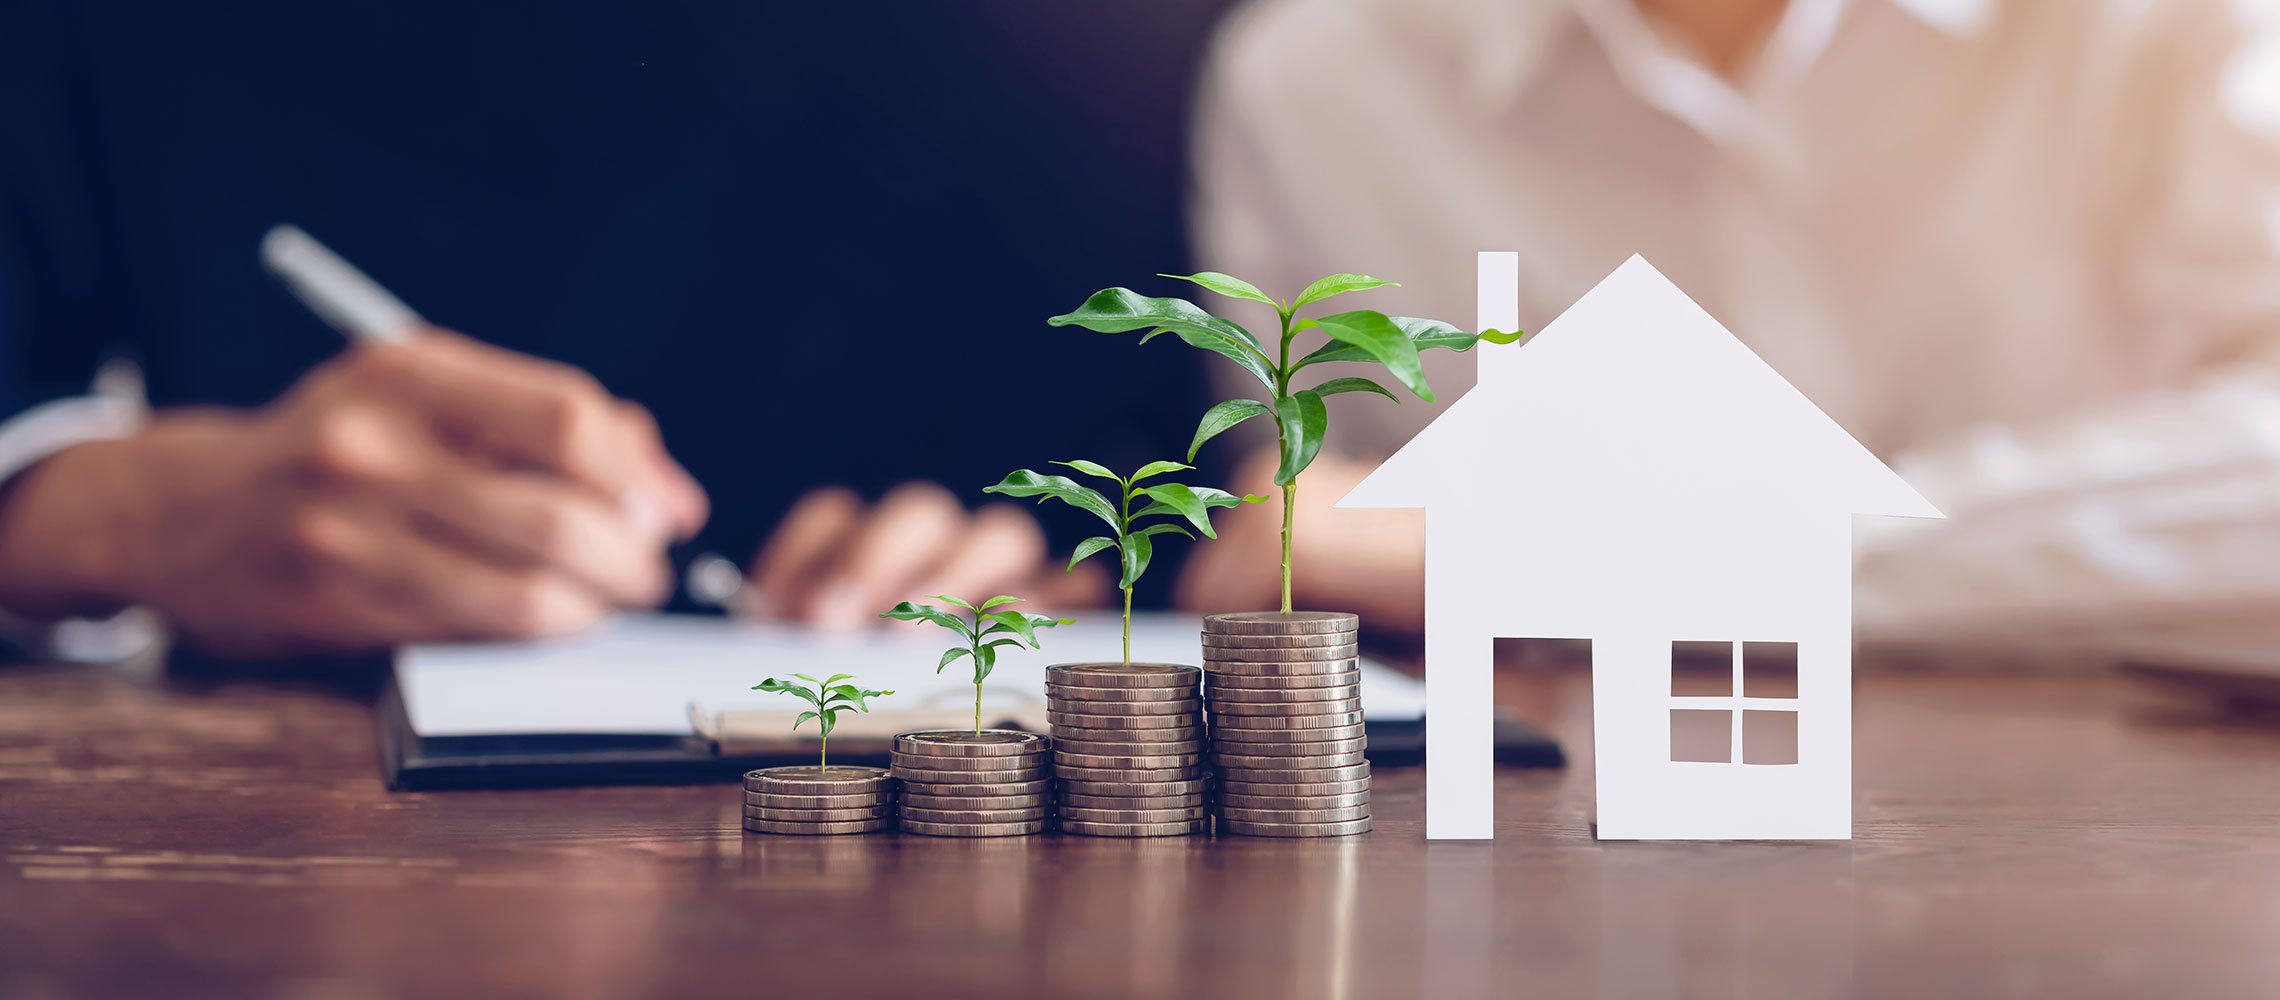 How to prepare financially for buying a new home